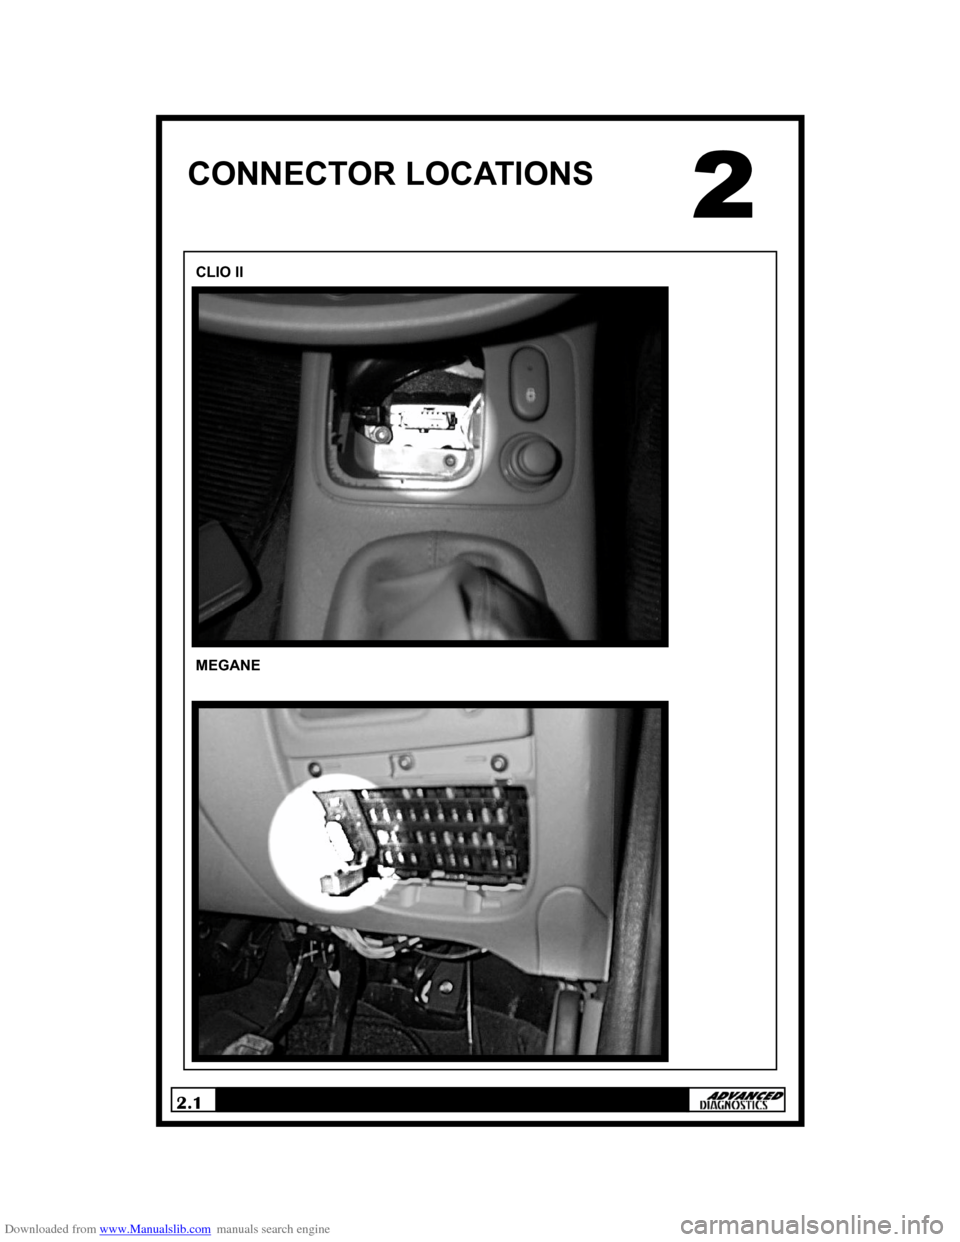 RENAULT CLIO 1997 X57 / 1.G Anti Theft System Manual Downloaded from www.Manualslib.com manuals search engine 2.1 
CONNECTOR LOCATIONS 
CLIO II 
MEGANE   